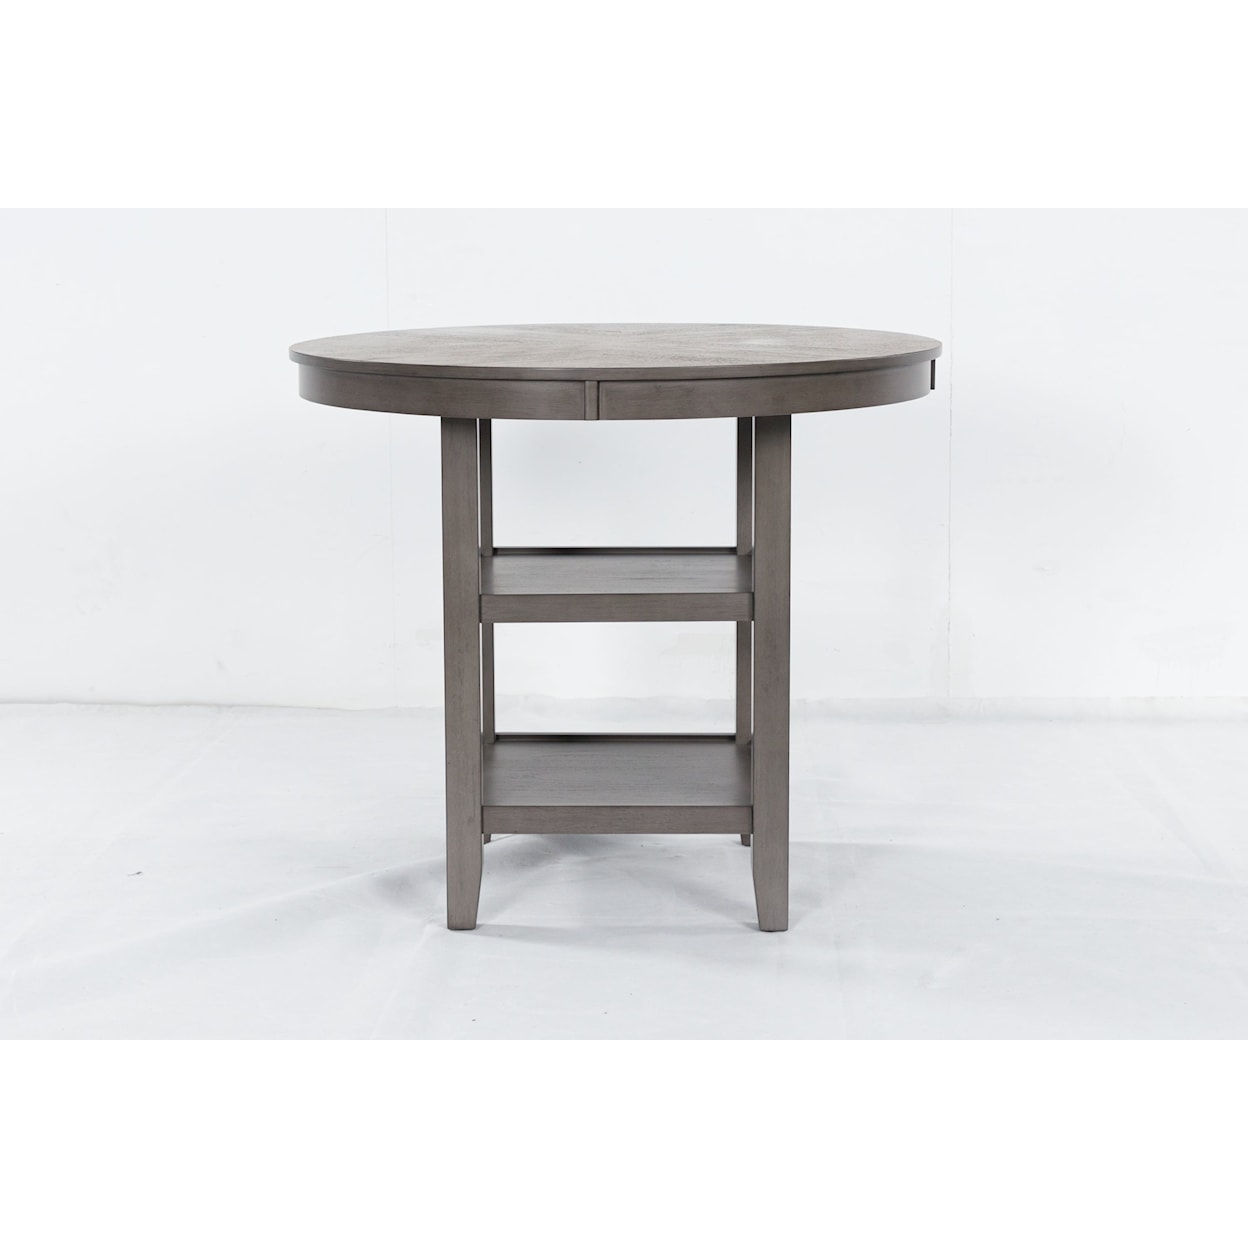 Benchcraft Wrenning Counter Dining Table & 4 Stools (Set of 5)